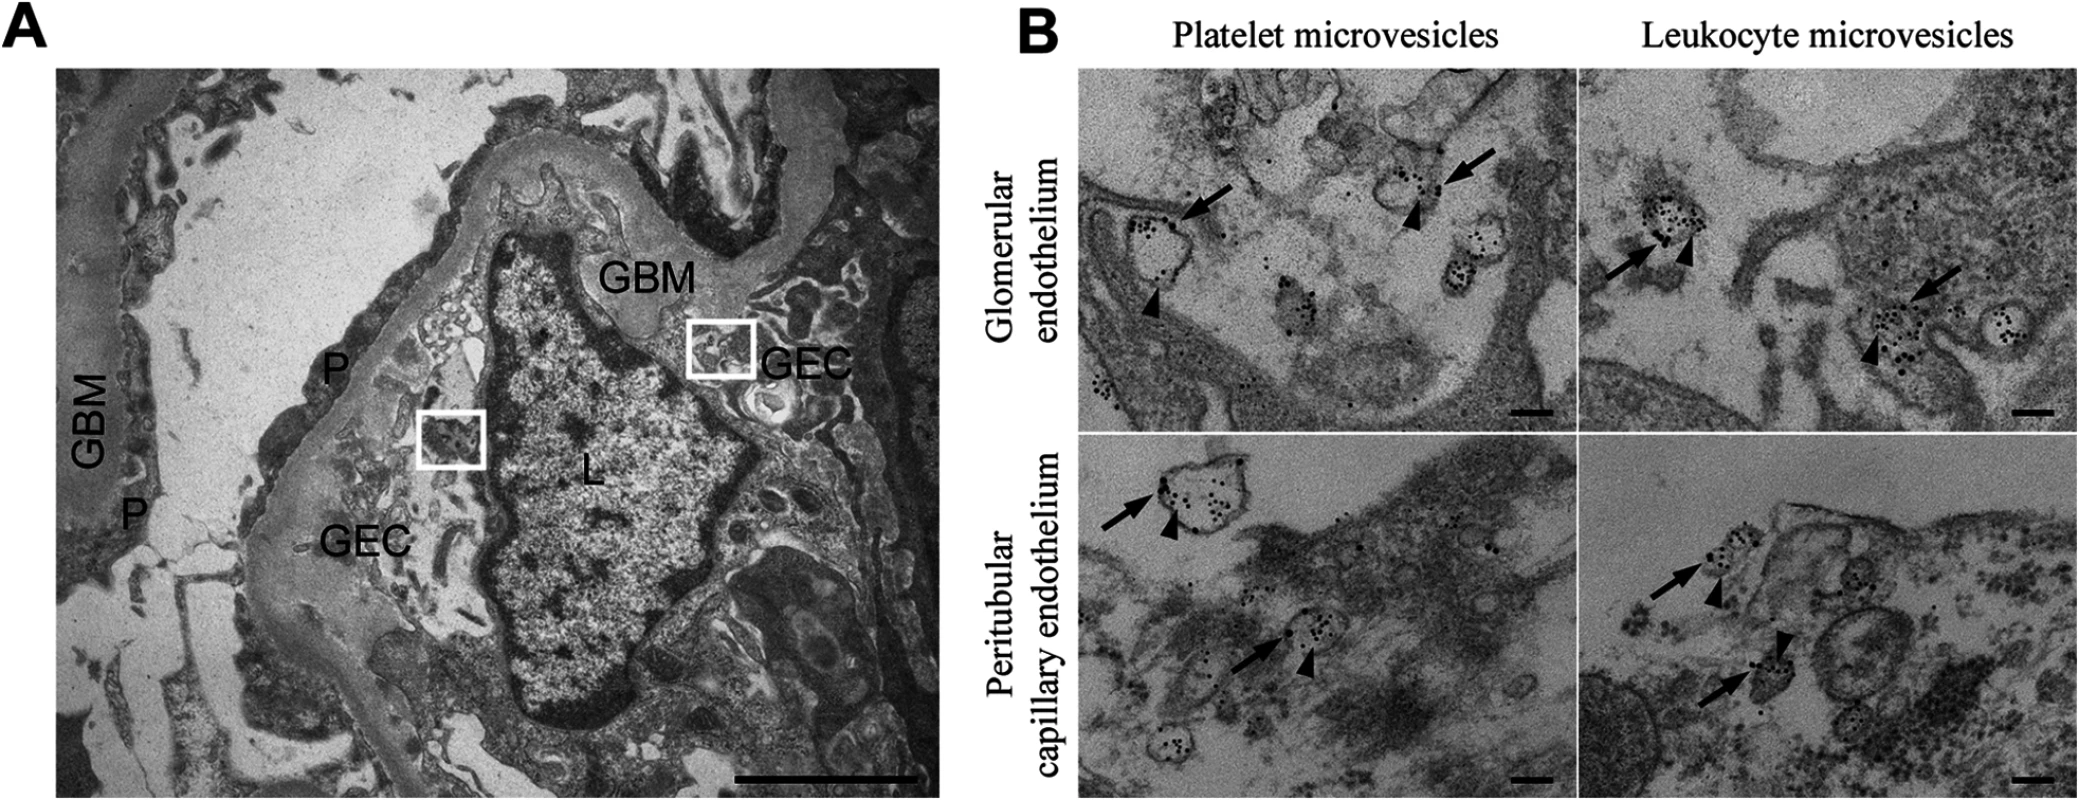 Stx2-containing blood cell-derived microvesicles detected in the renal cortex of a HUS patient.